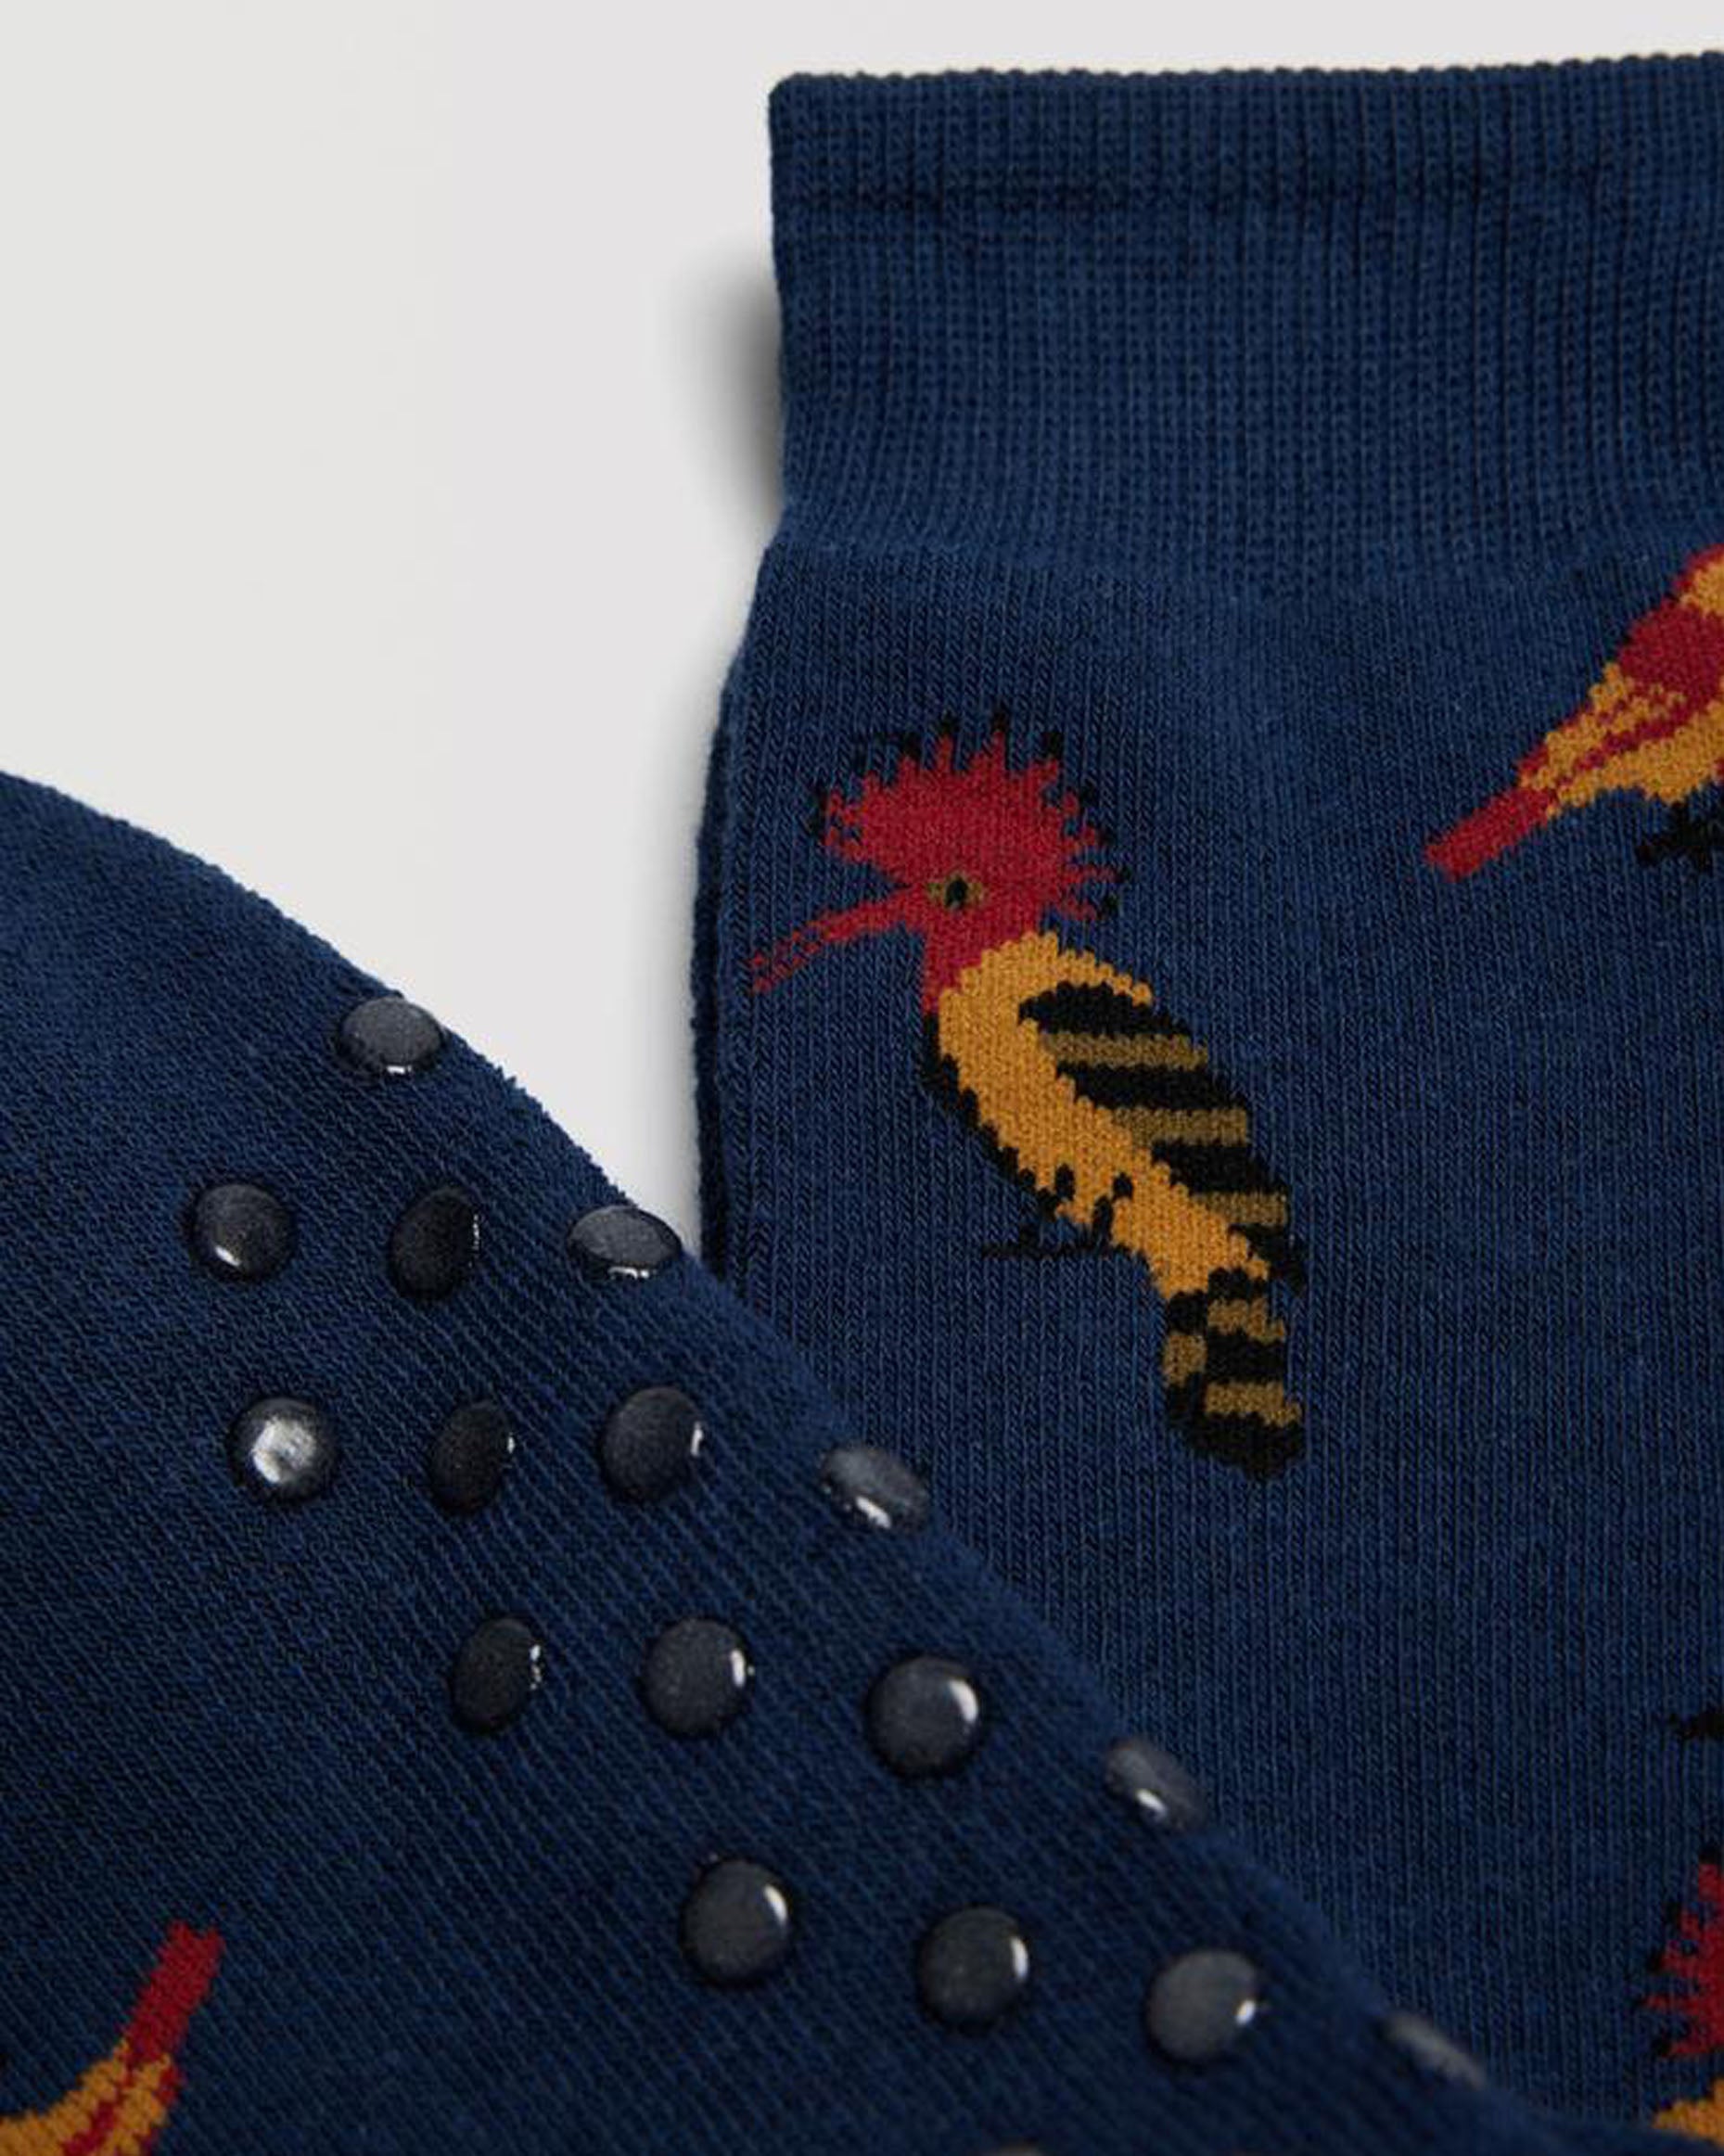 Ysabel Mora 22888 Bird Slipper Socks - Navy blue thick and warm terry lined cotton mix crew length ankle socks with an all over exotic birds pattern in red, mustard, brown and black, dotted non-slip sole and deep elasticated comfort cuff.